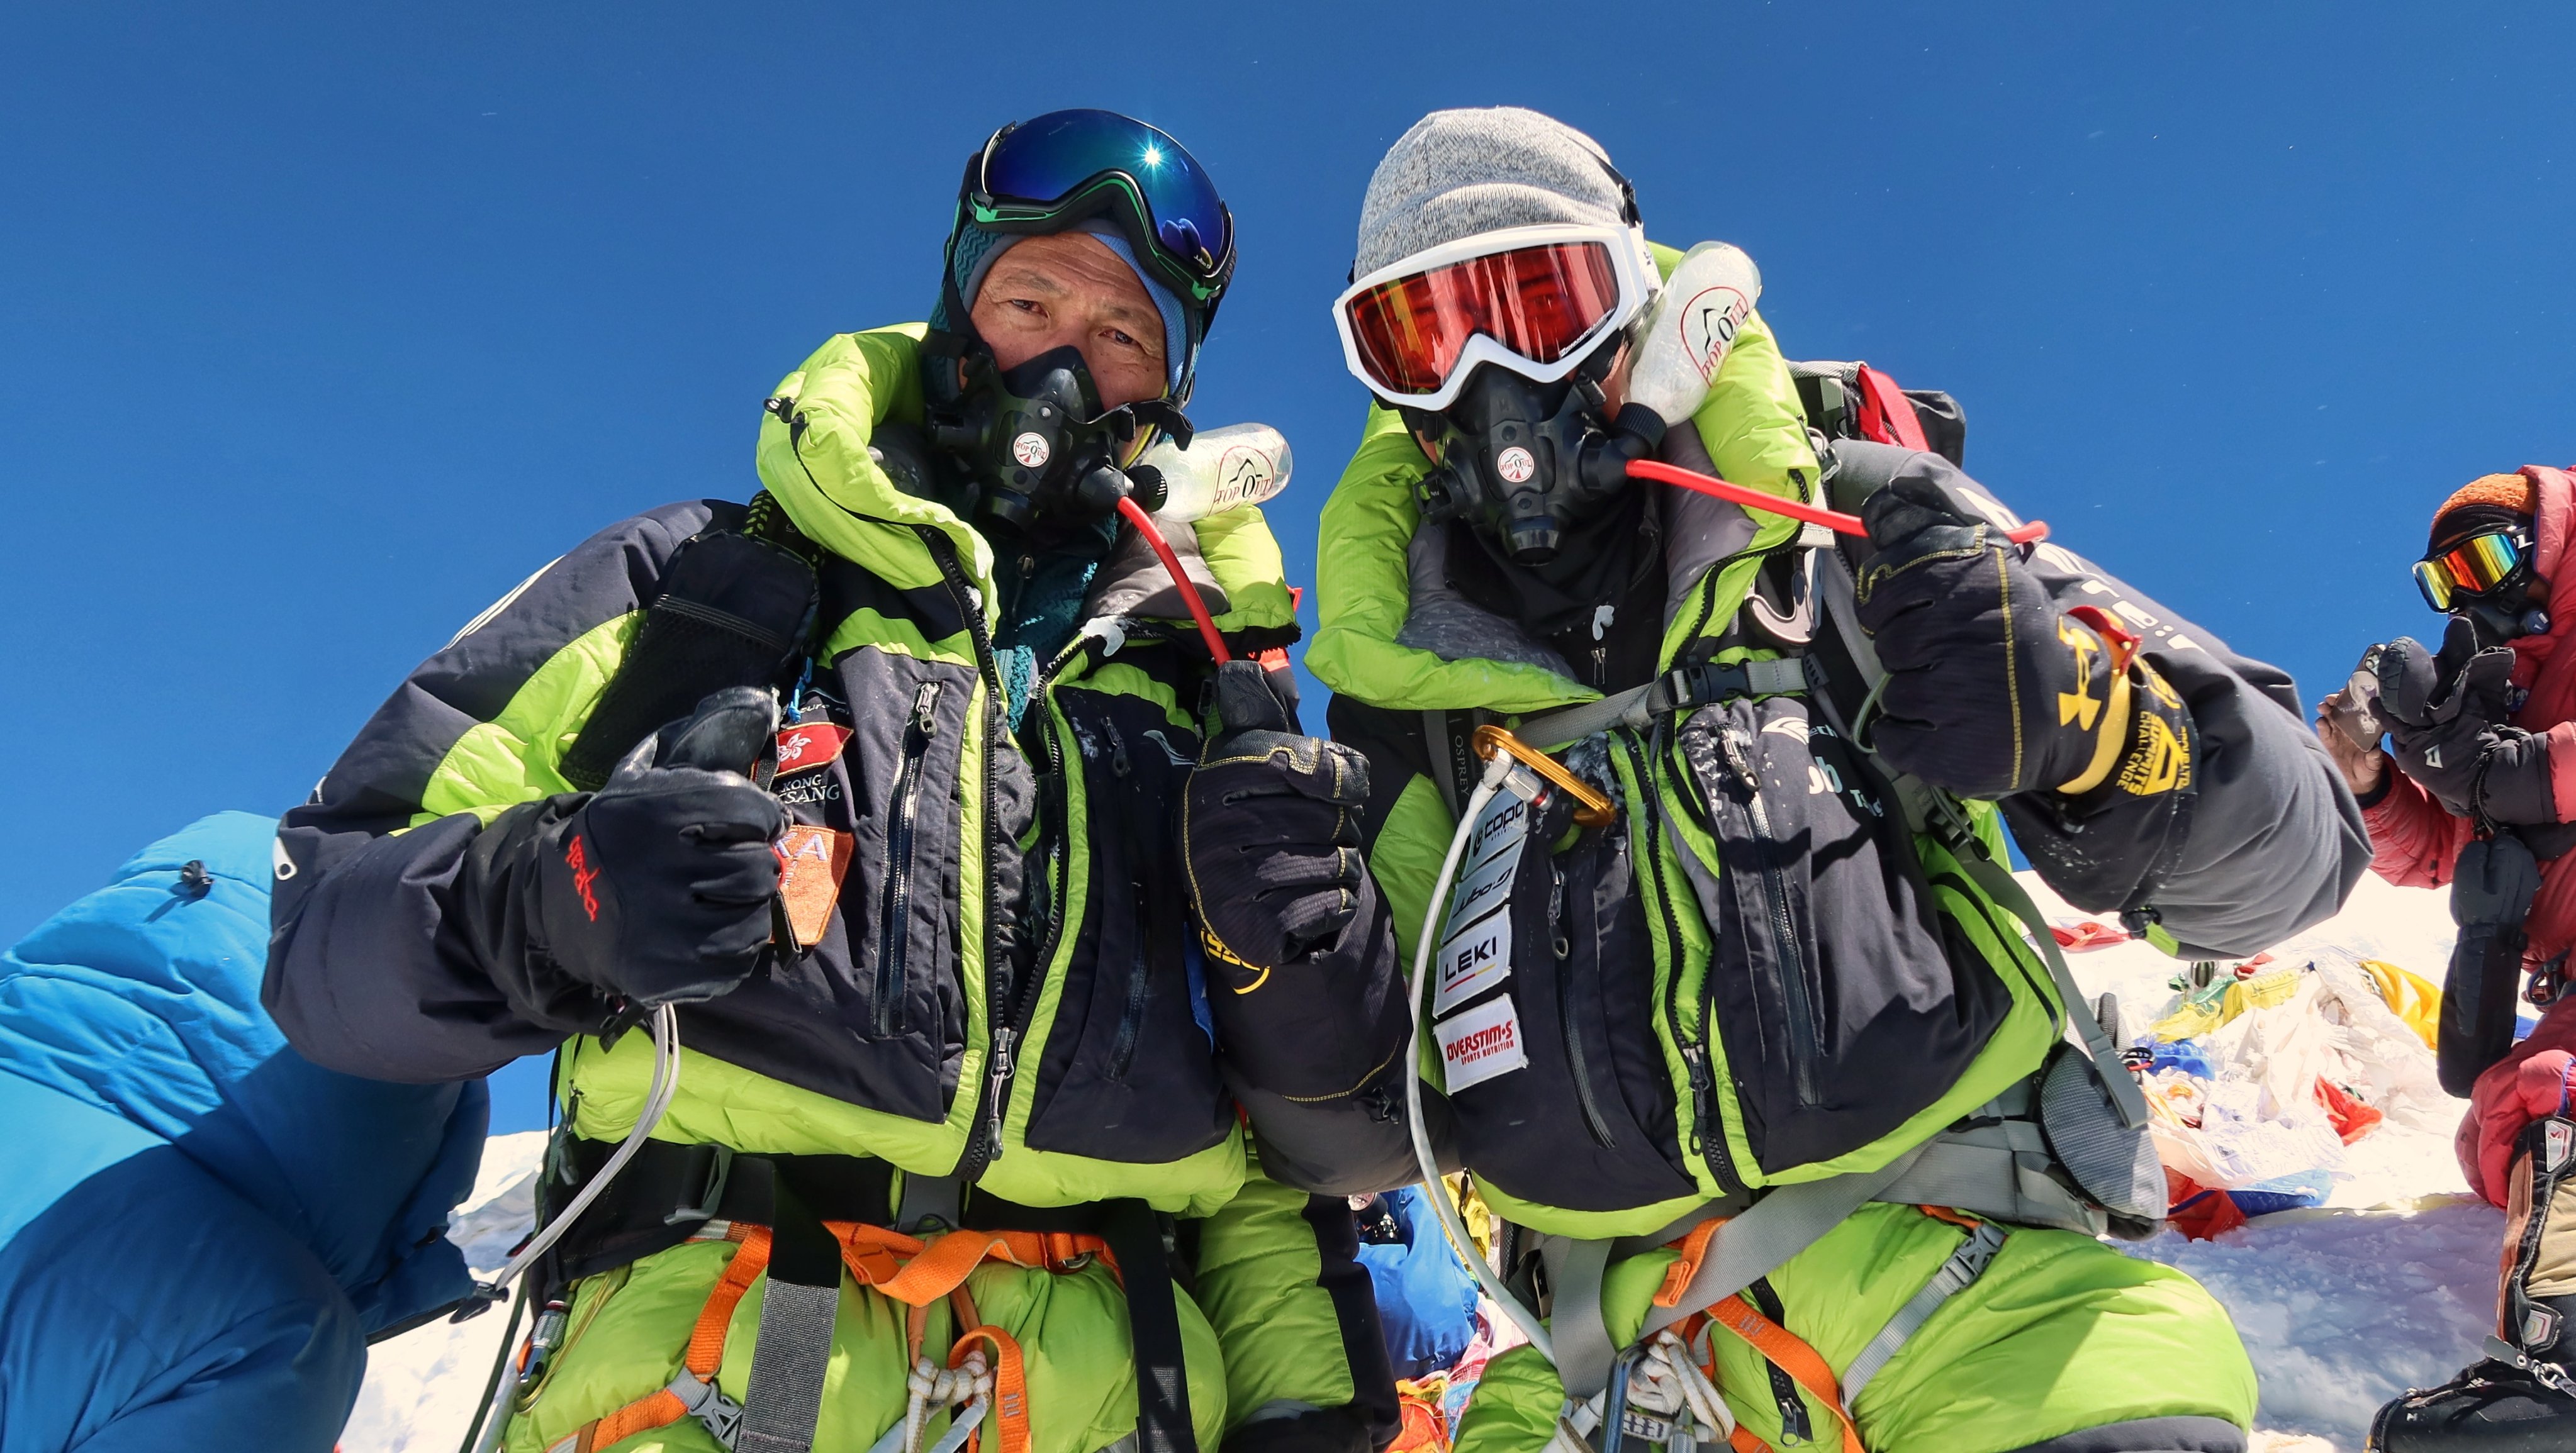 John Tsang (left) and his 18-year-old son Bob on the summit of Everest earlier this year. They talk about the physical and mental challenges they overcame to reach the summit. Photo: the Tsang family